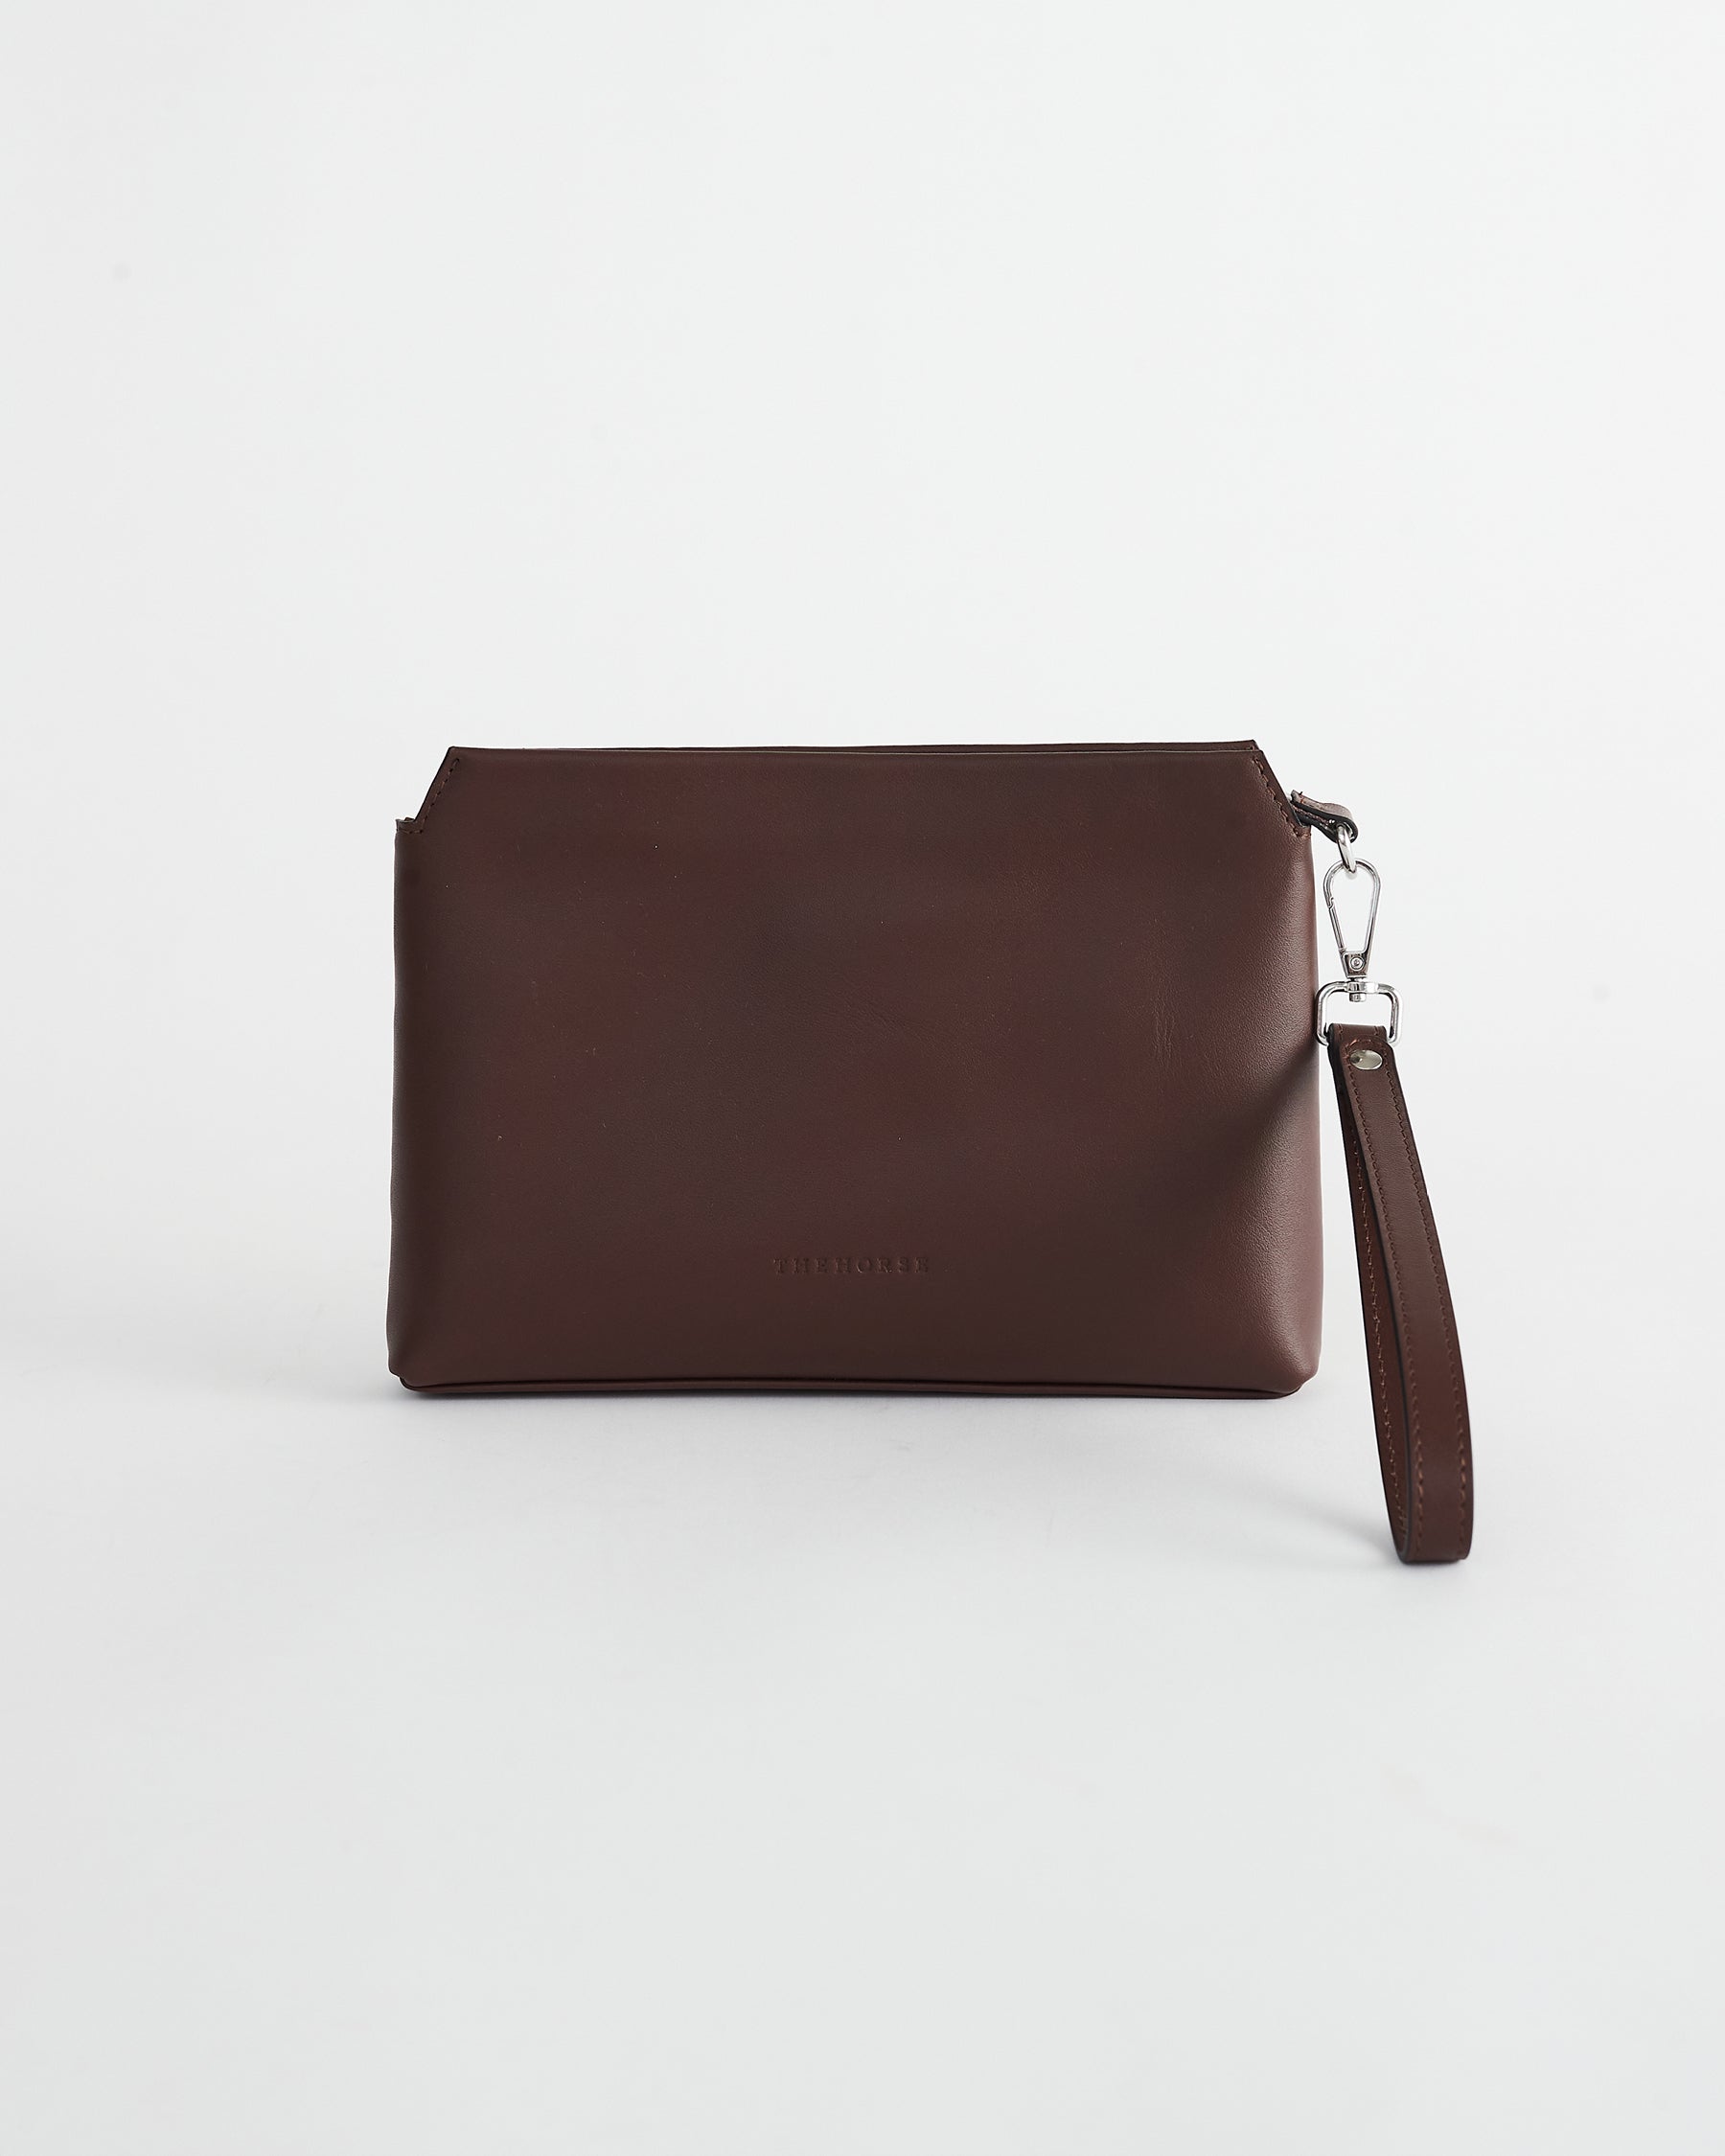 The Lola Smooth Leather Clutch in Coffee by The Horse®